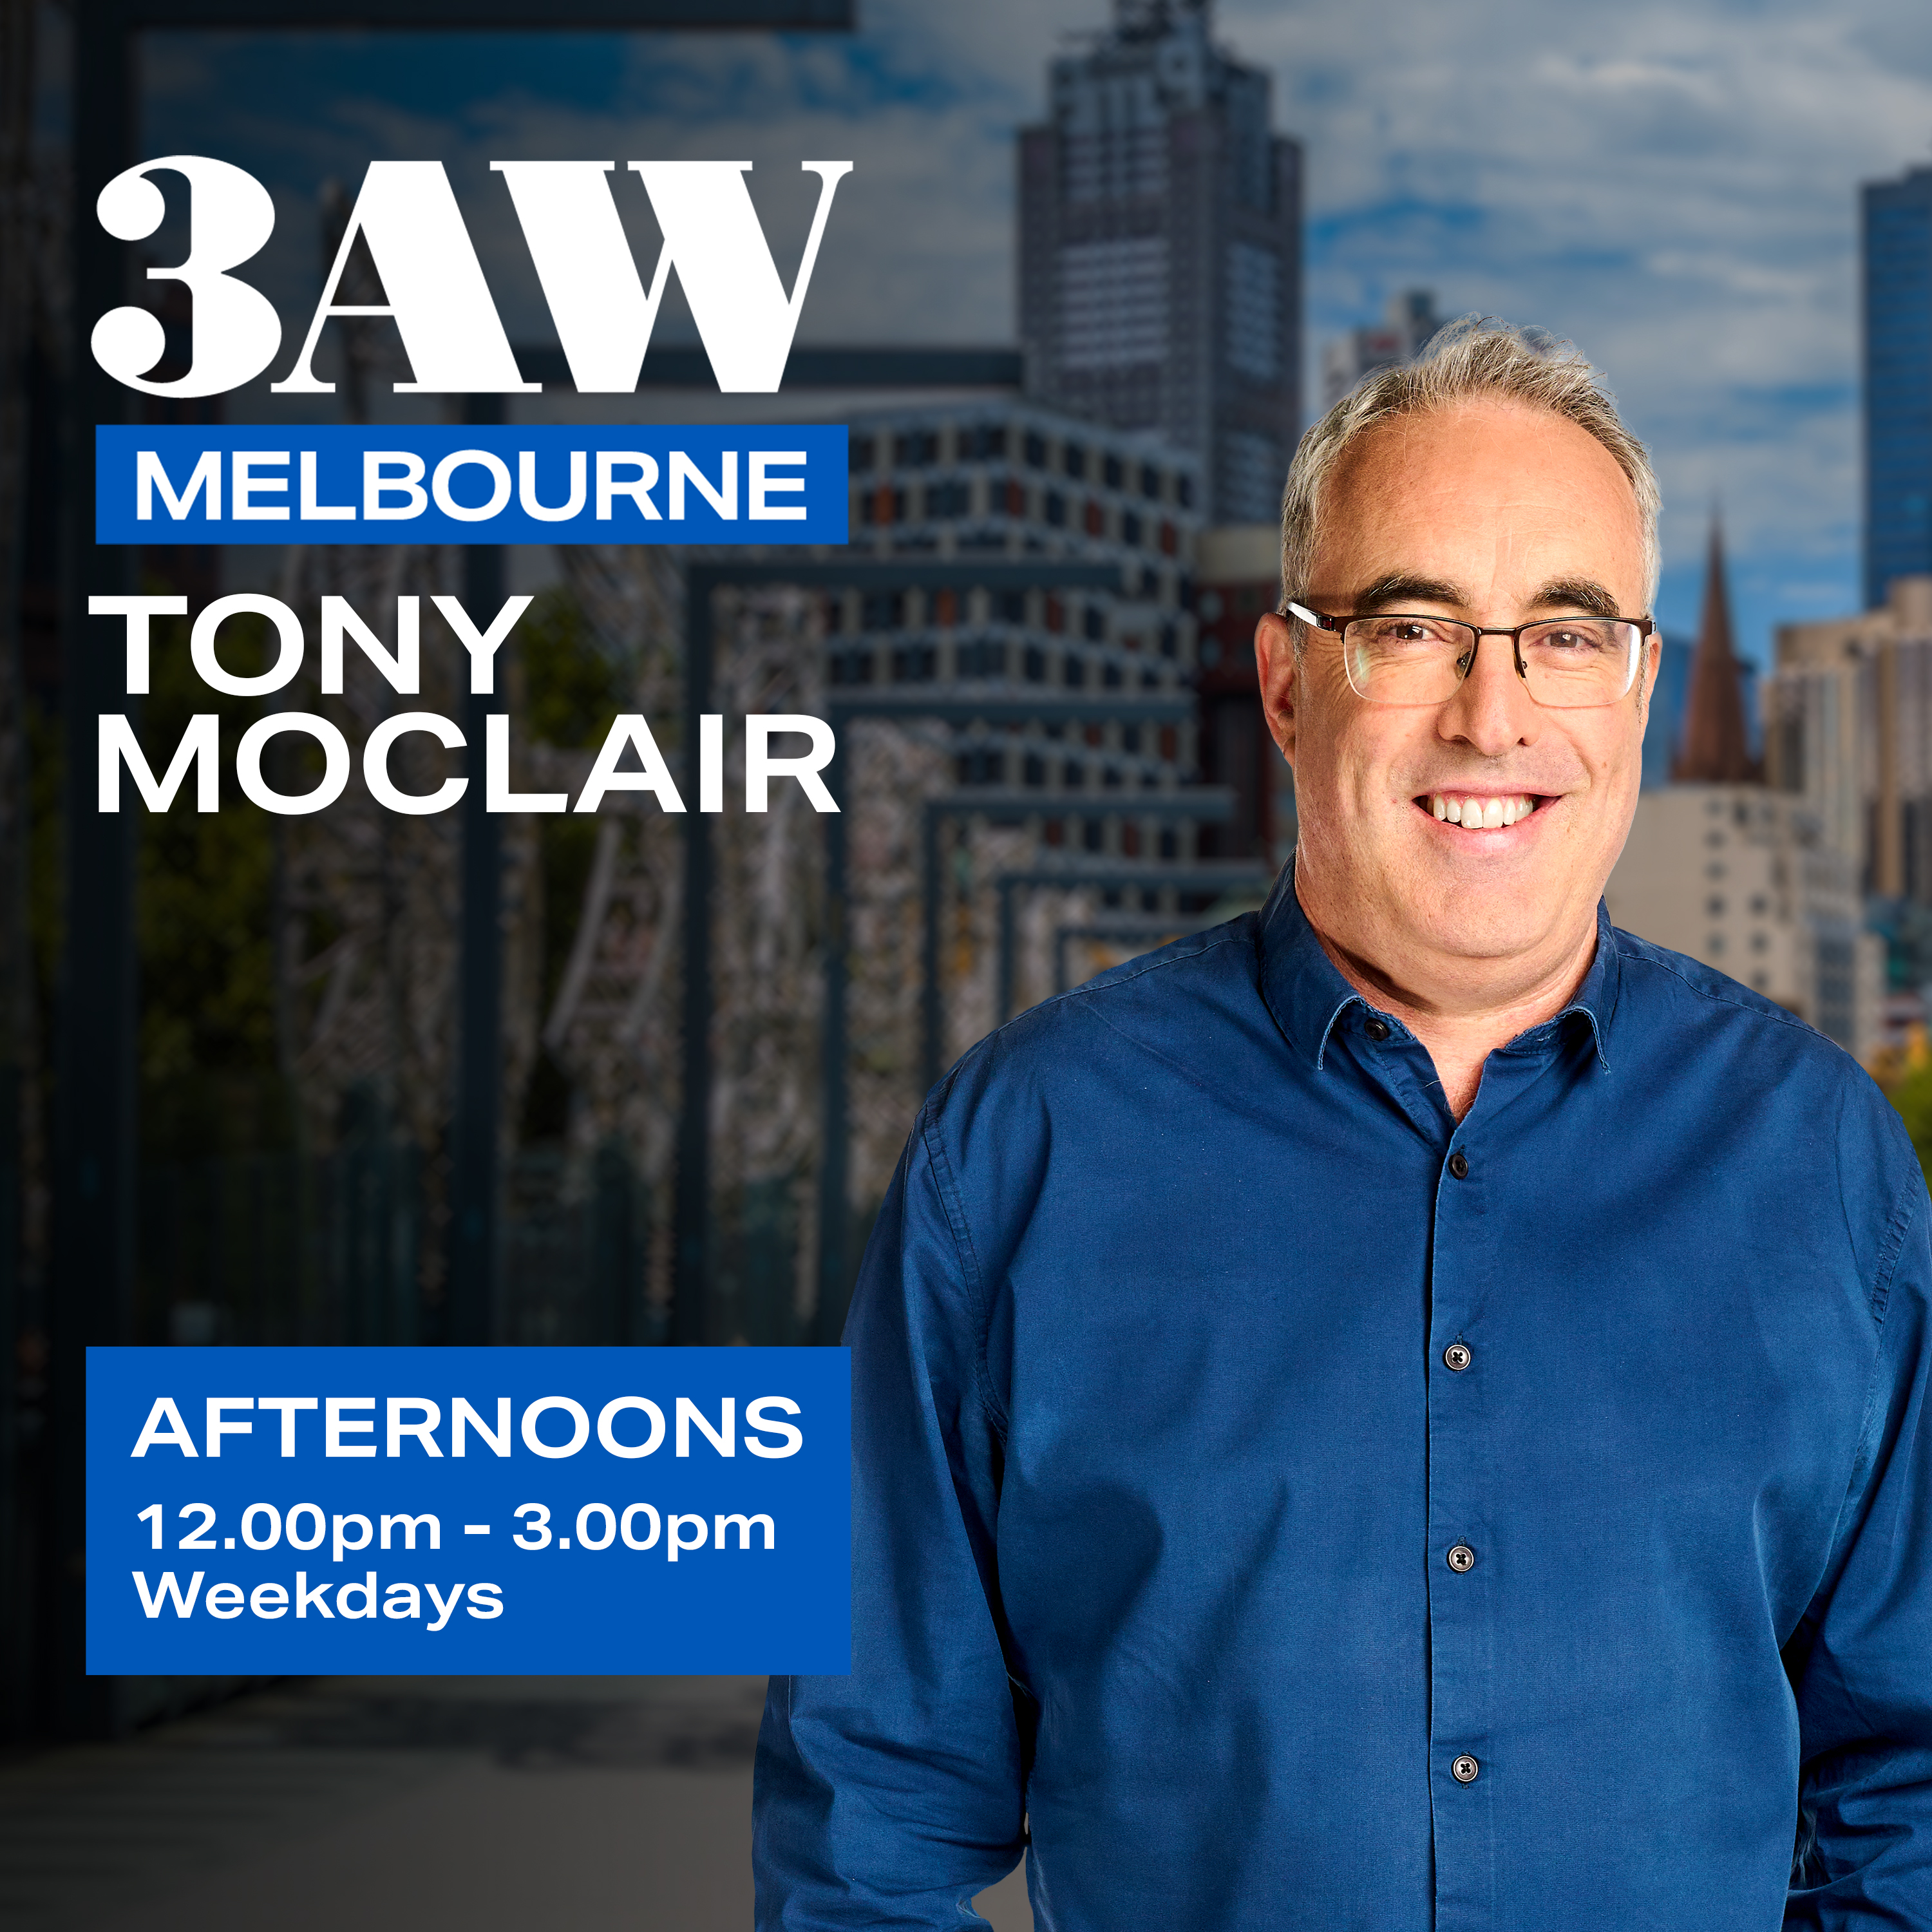 Kev Poulton joins Tony Moclair for his weekly segment!